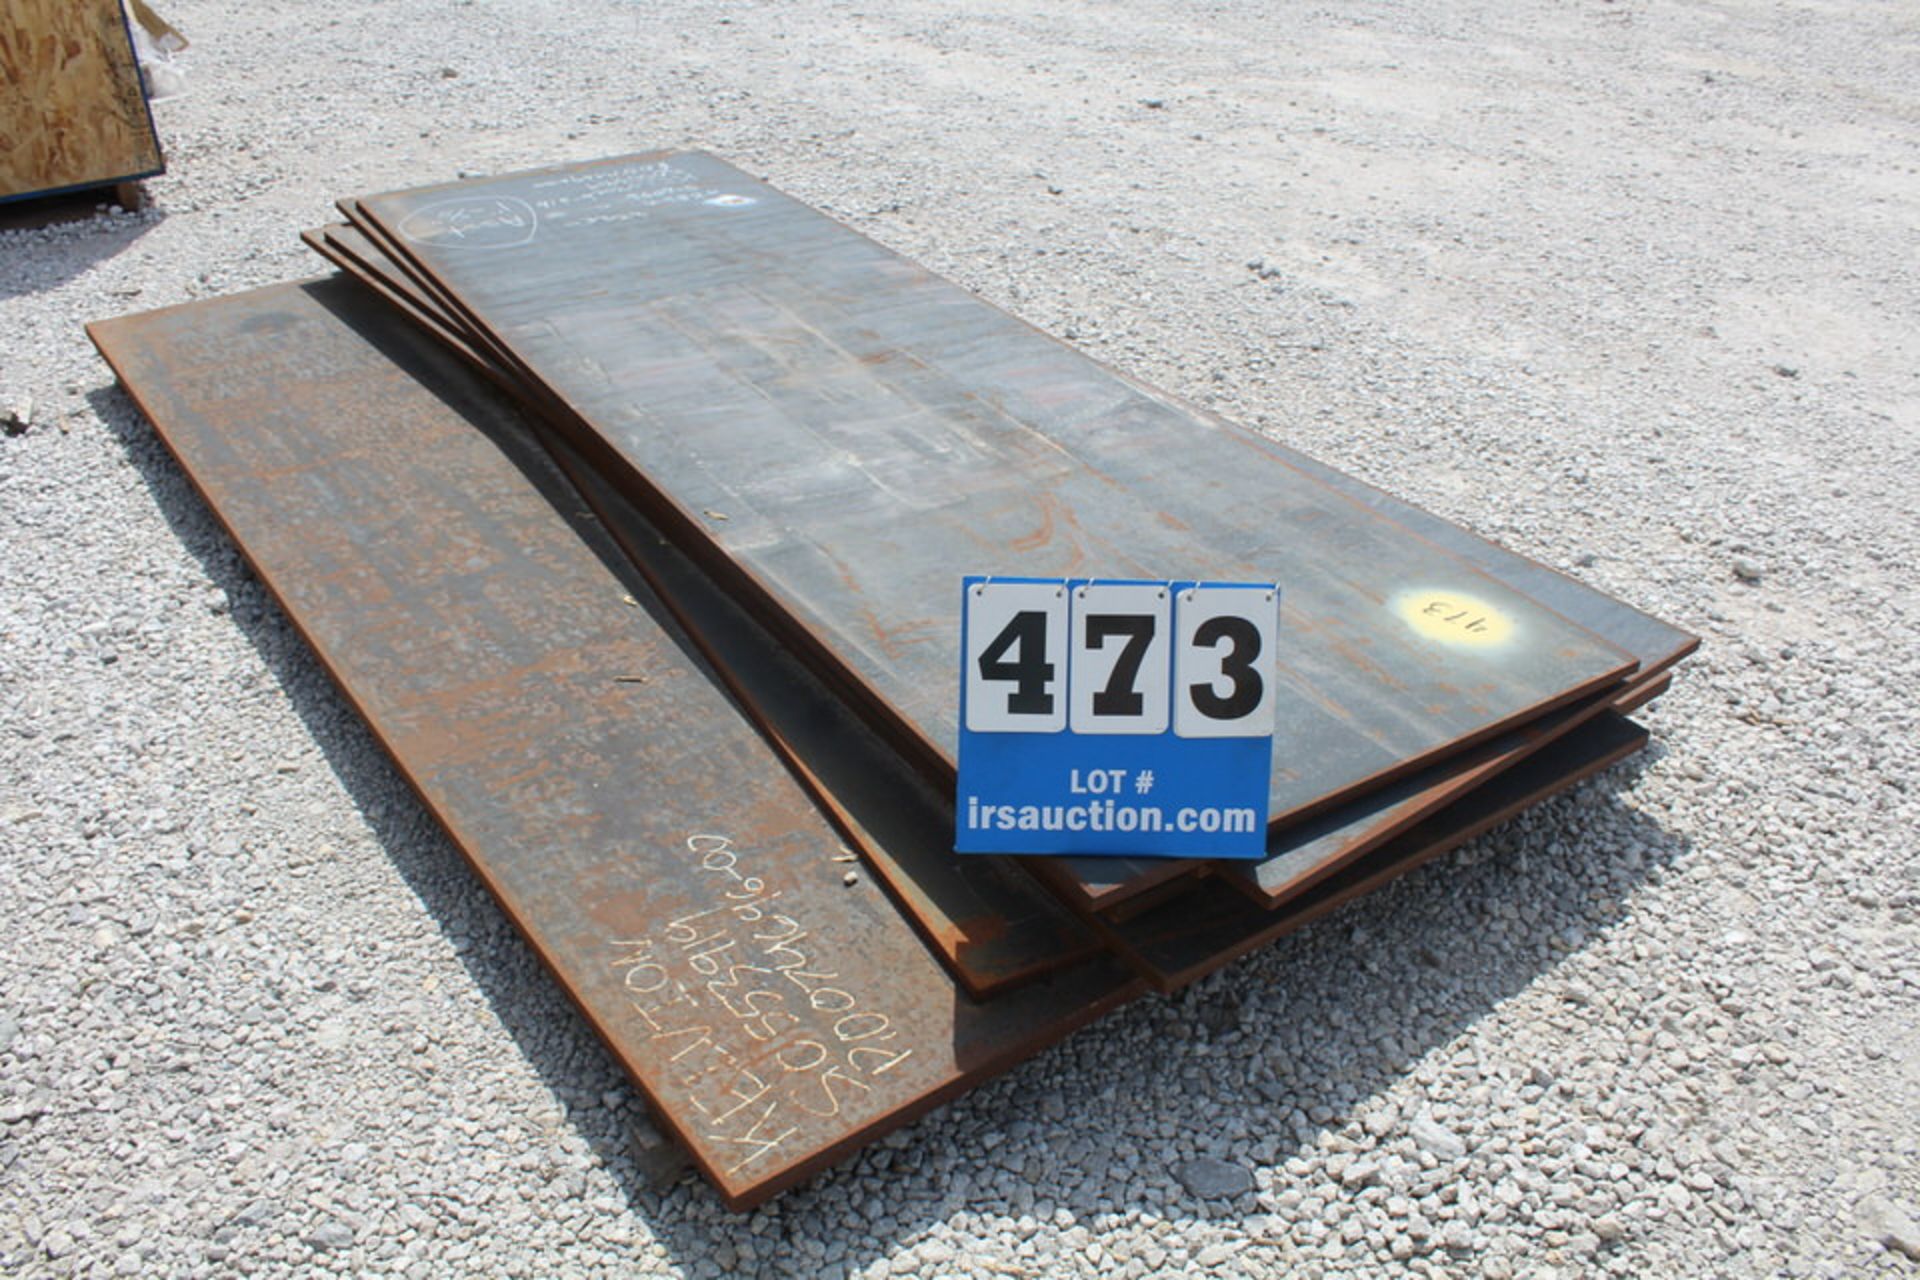 ASST 1" X 5/8" CARBON STEEL PLATE (Location: 5202 West Channel Rd, Catoosa, OK 74015)